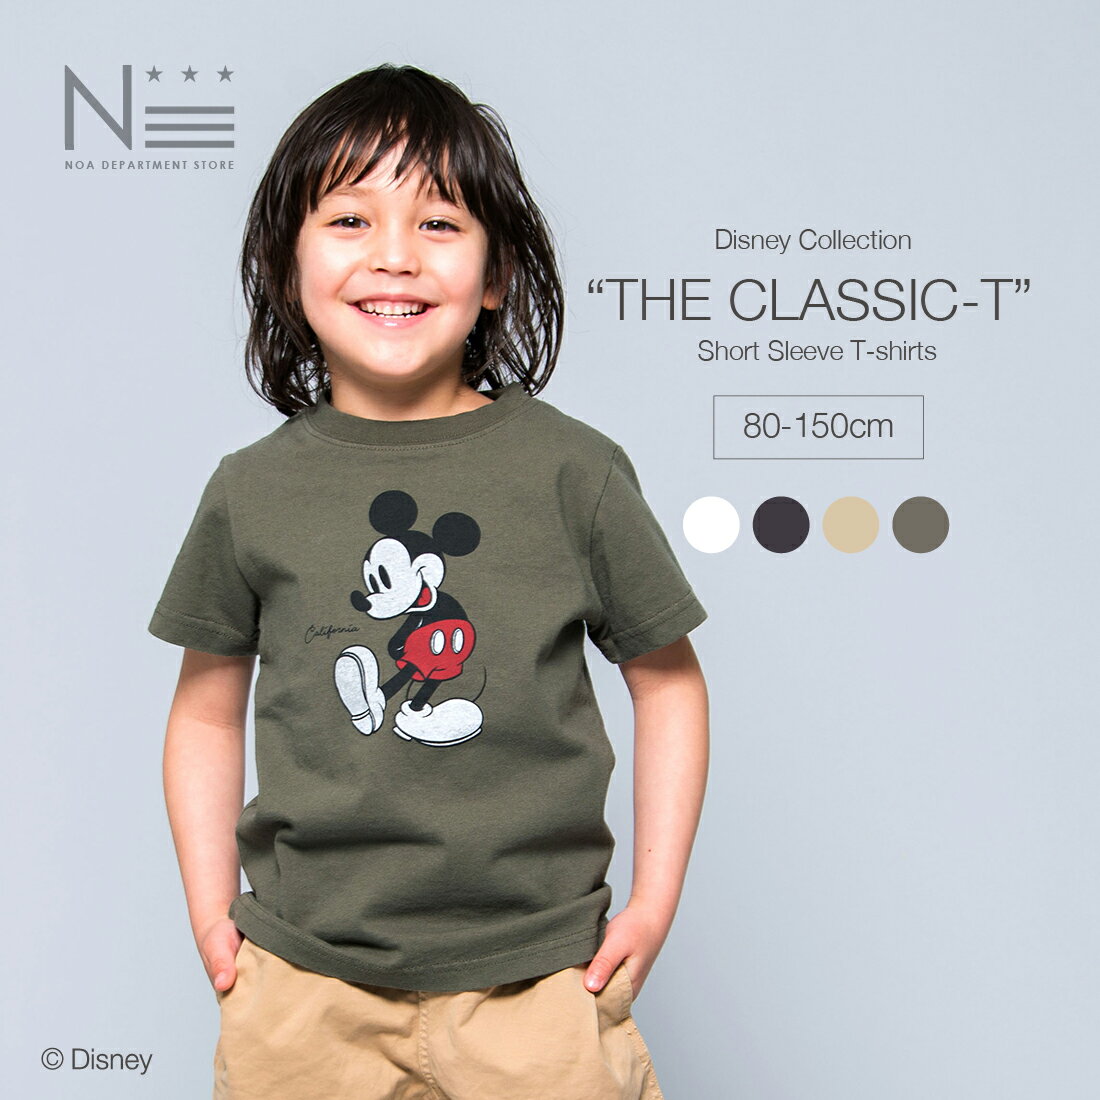 noa department store. THE CLASSIC ミッキー